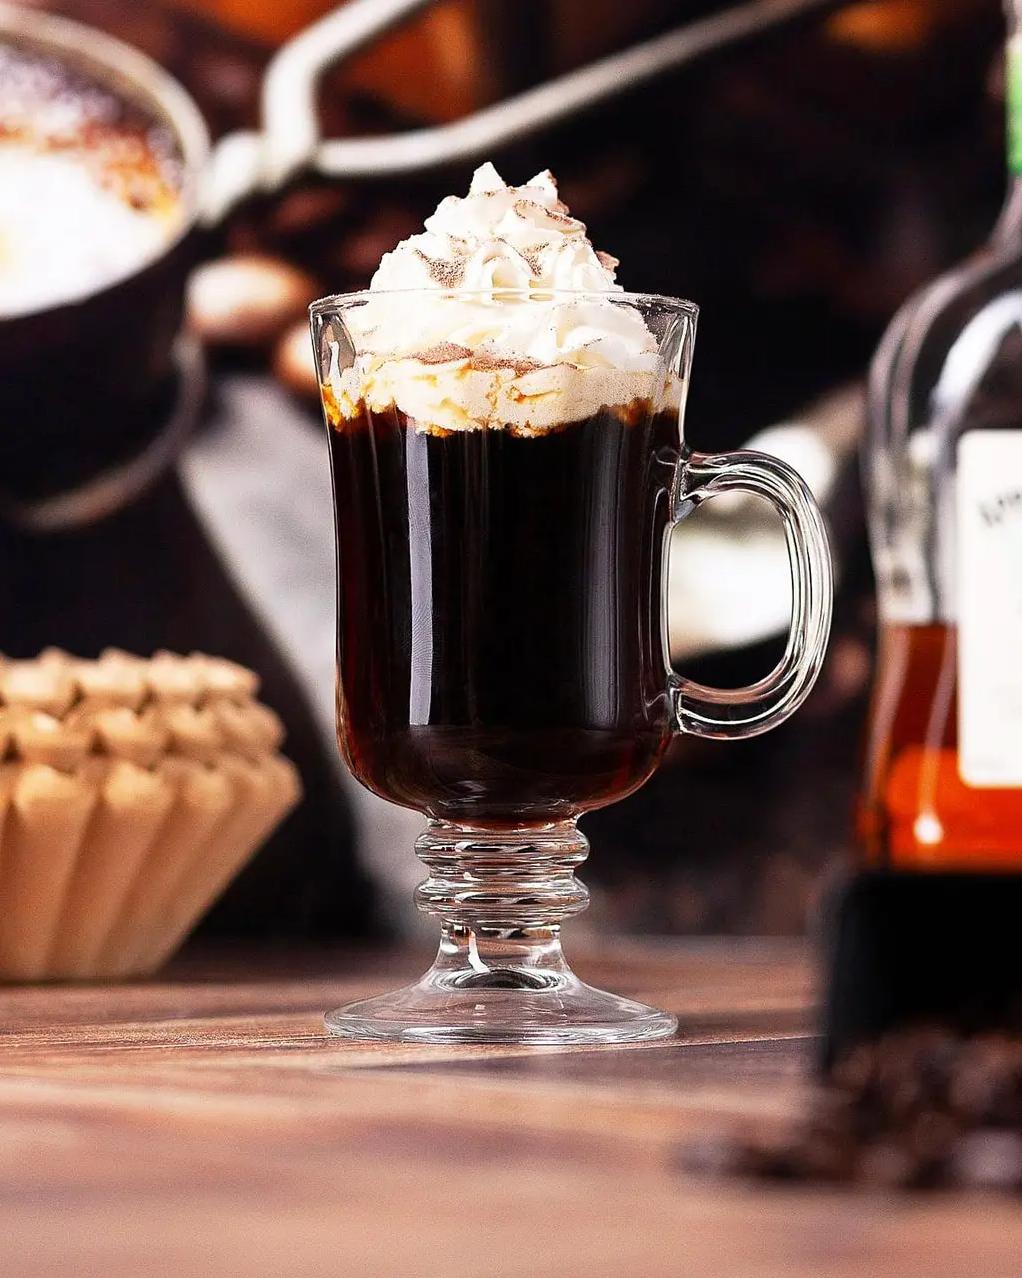  The combination of coffee, chocolate, and rum creates a perfect harmony of flavors.